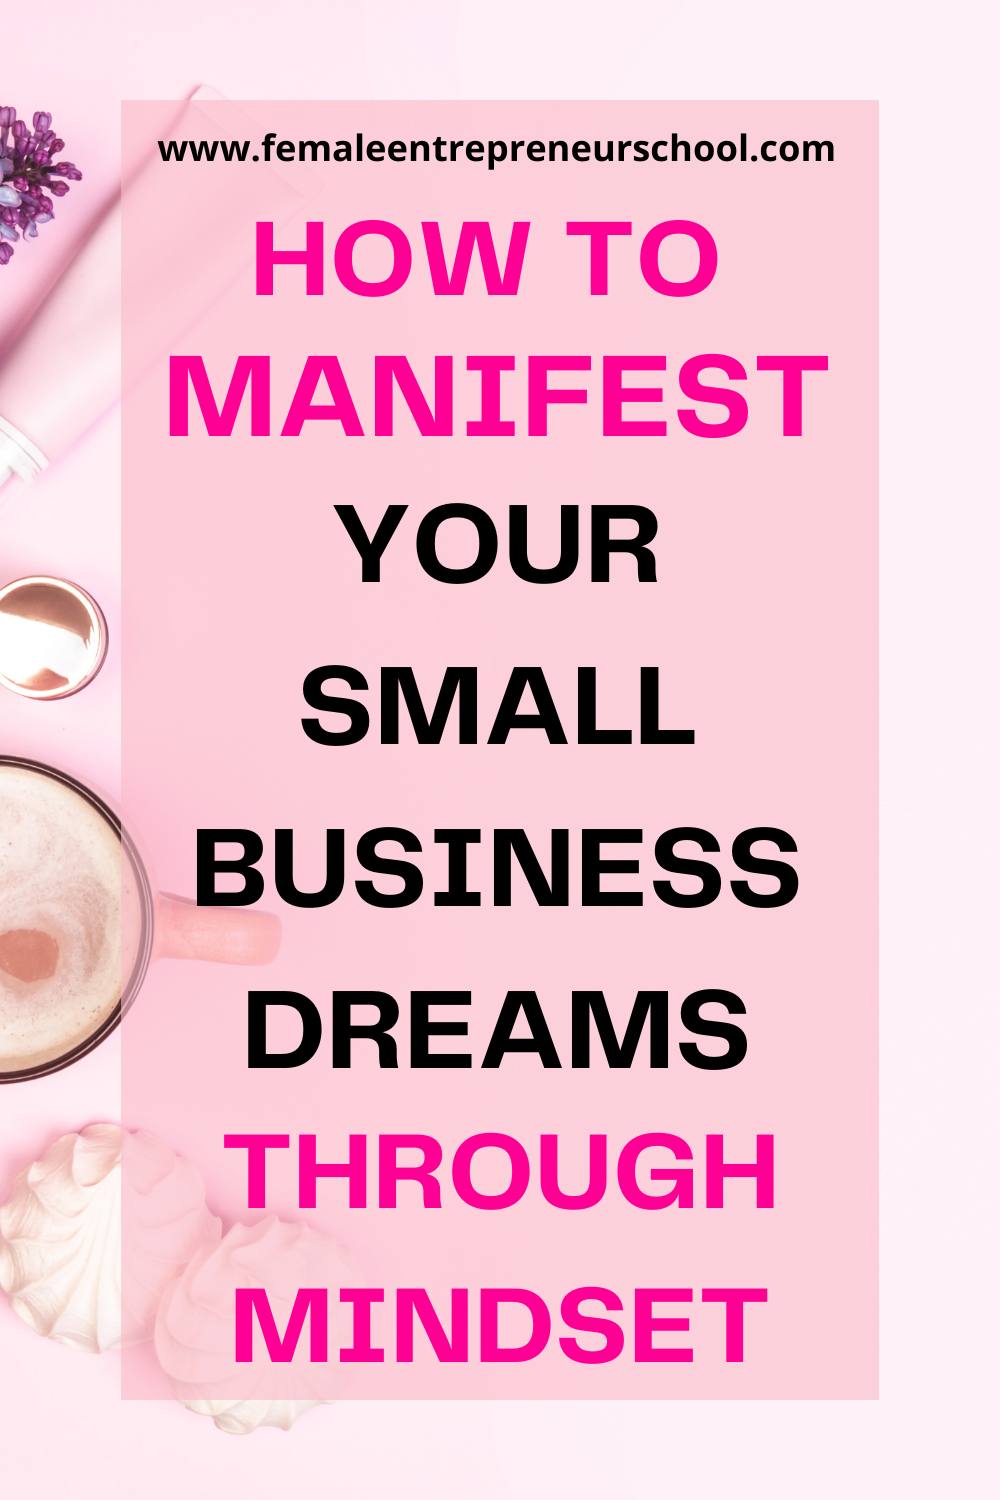 How To Manifest Your Small Business Dreams Through Mindset